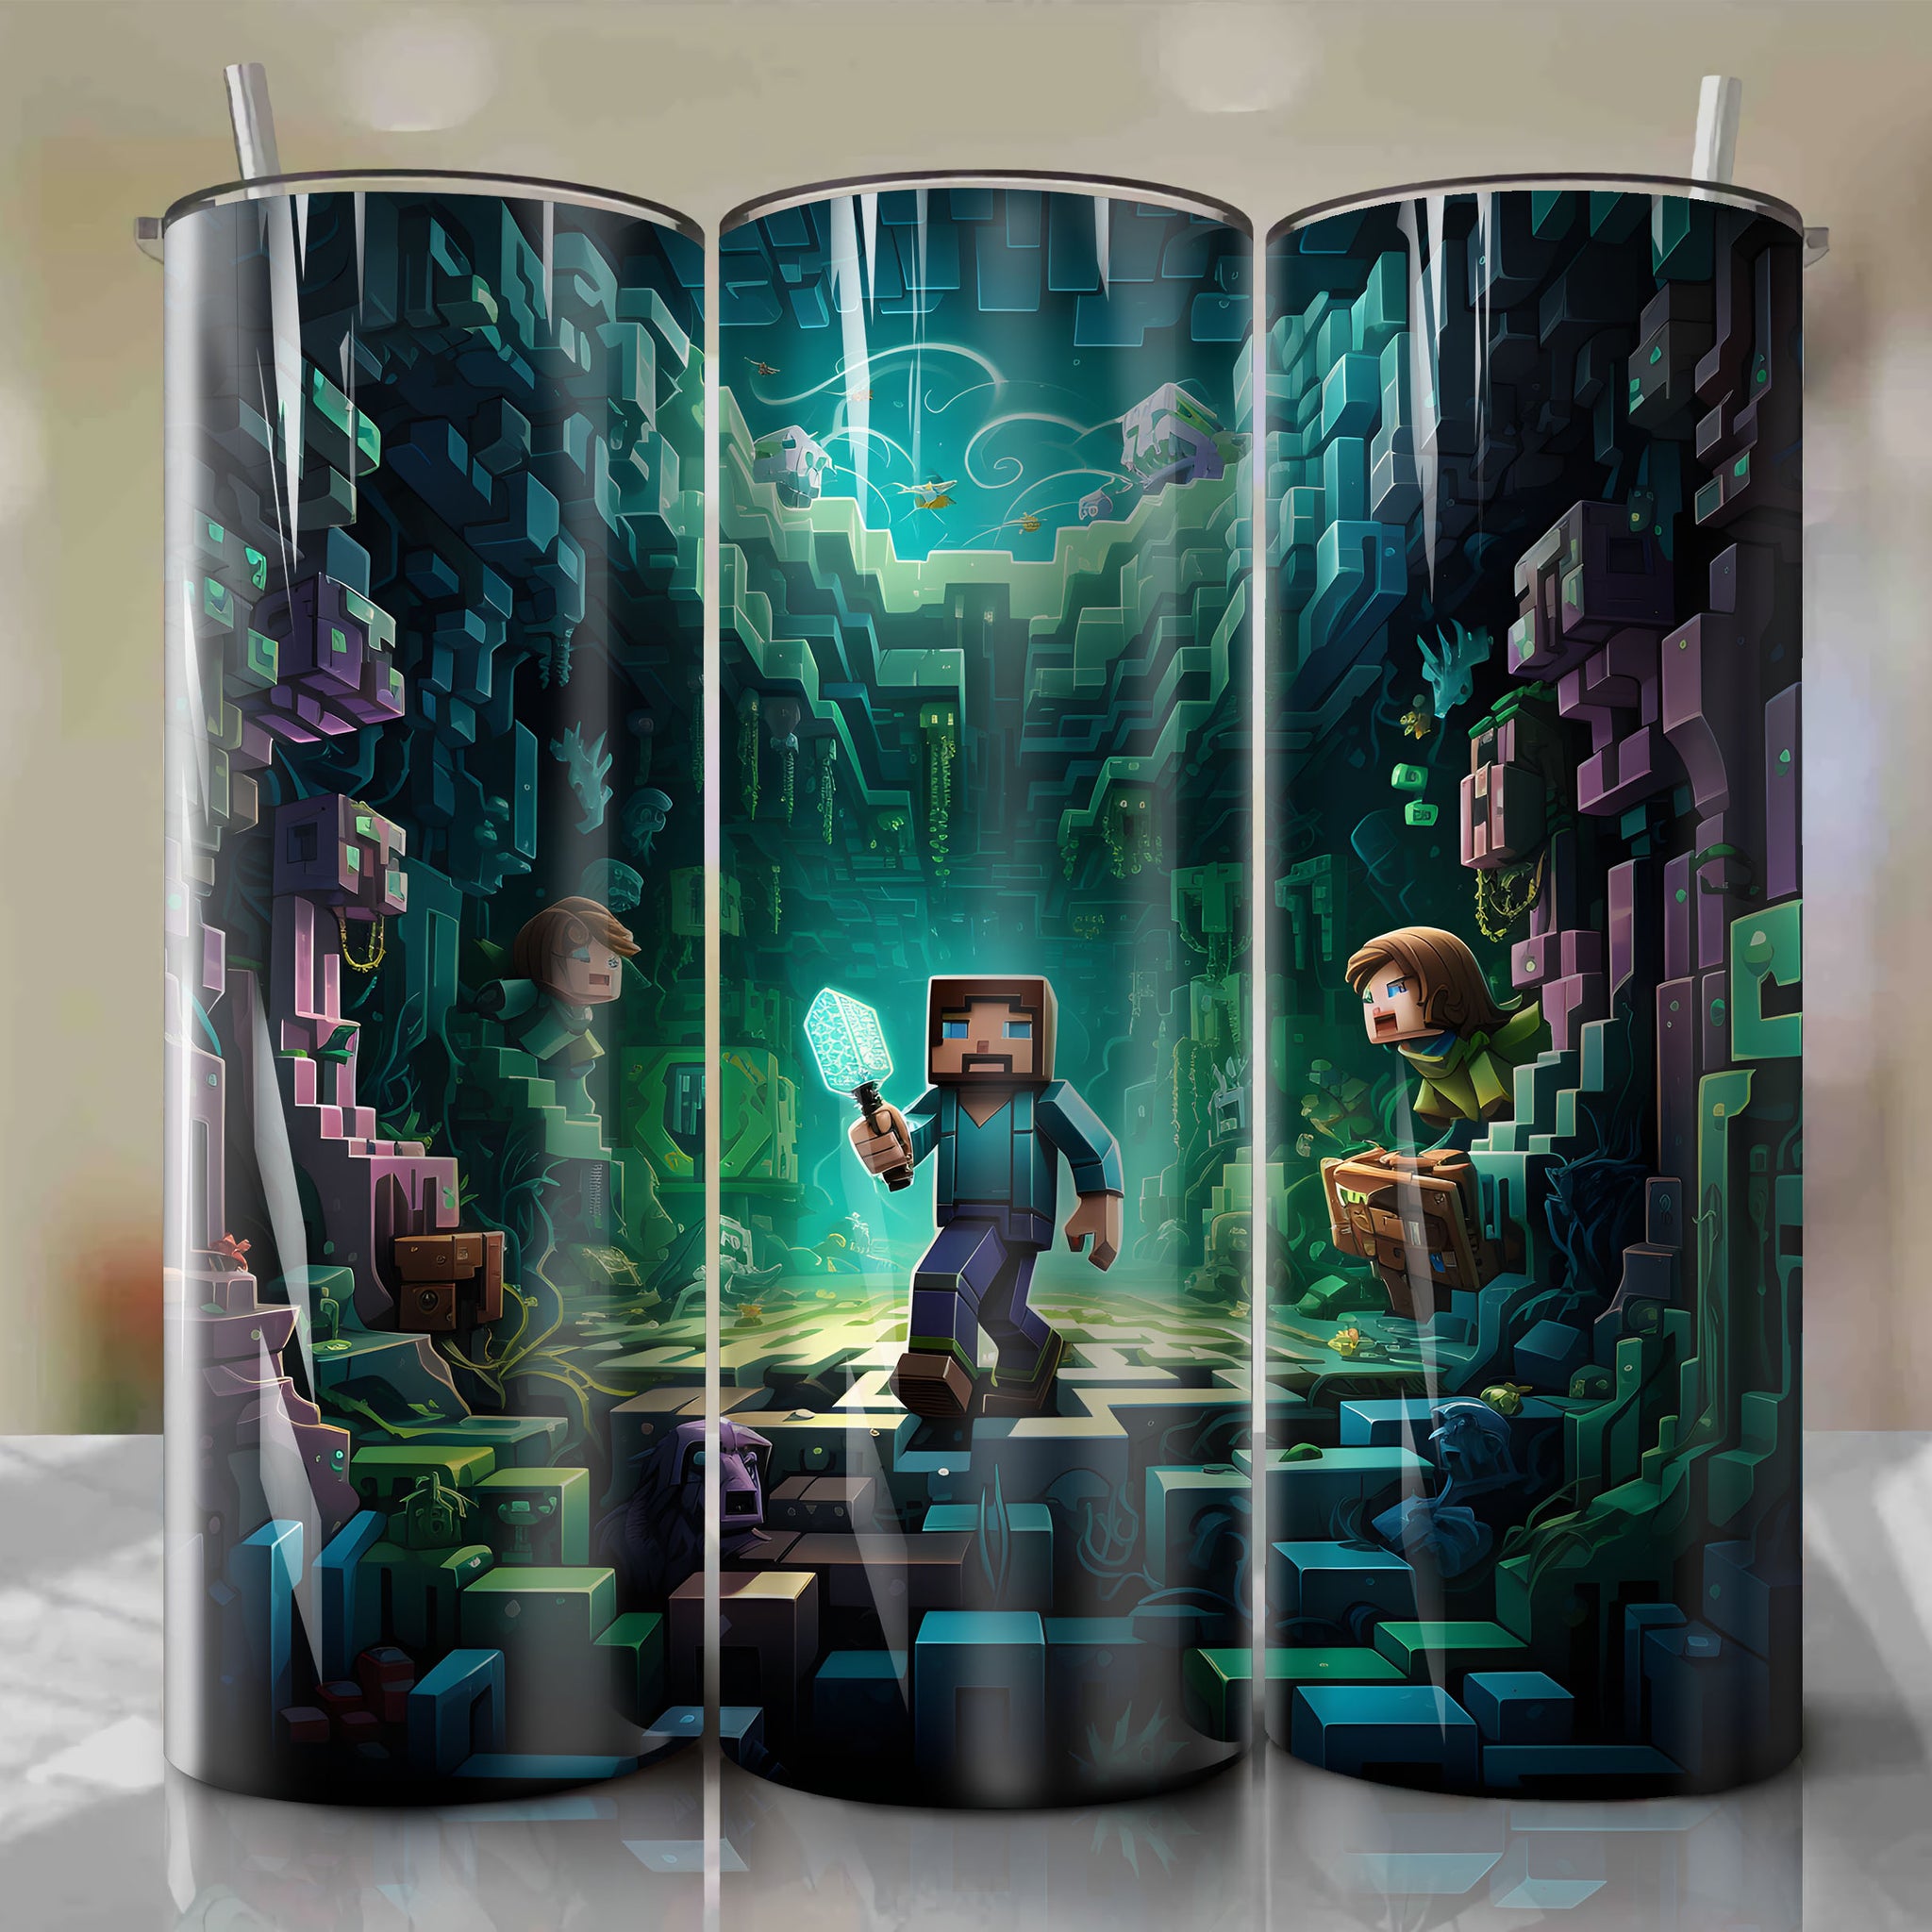 Minecraft 20 Oz Tumbler Wrap - Vibrant 3D Art by Dan Mumford: Steve Emerges from Shattered Barrier
